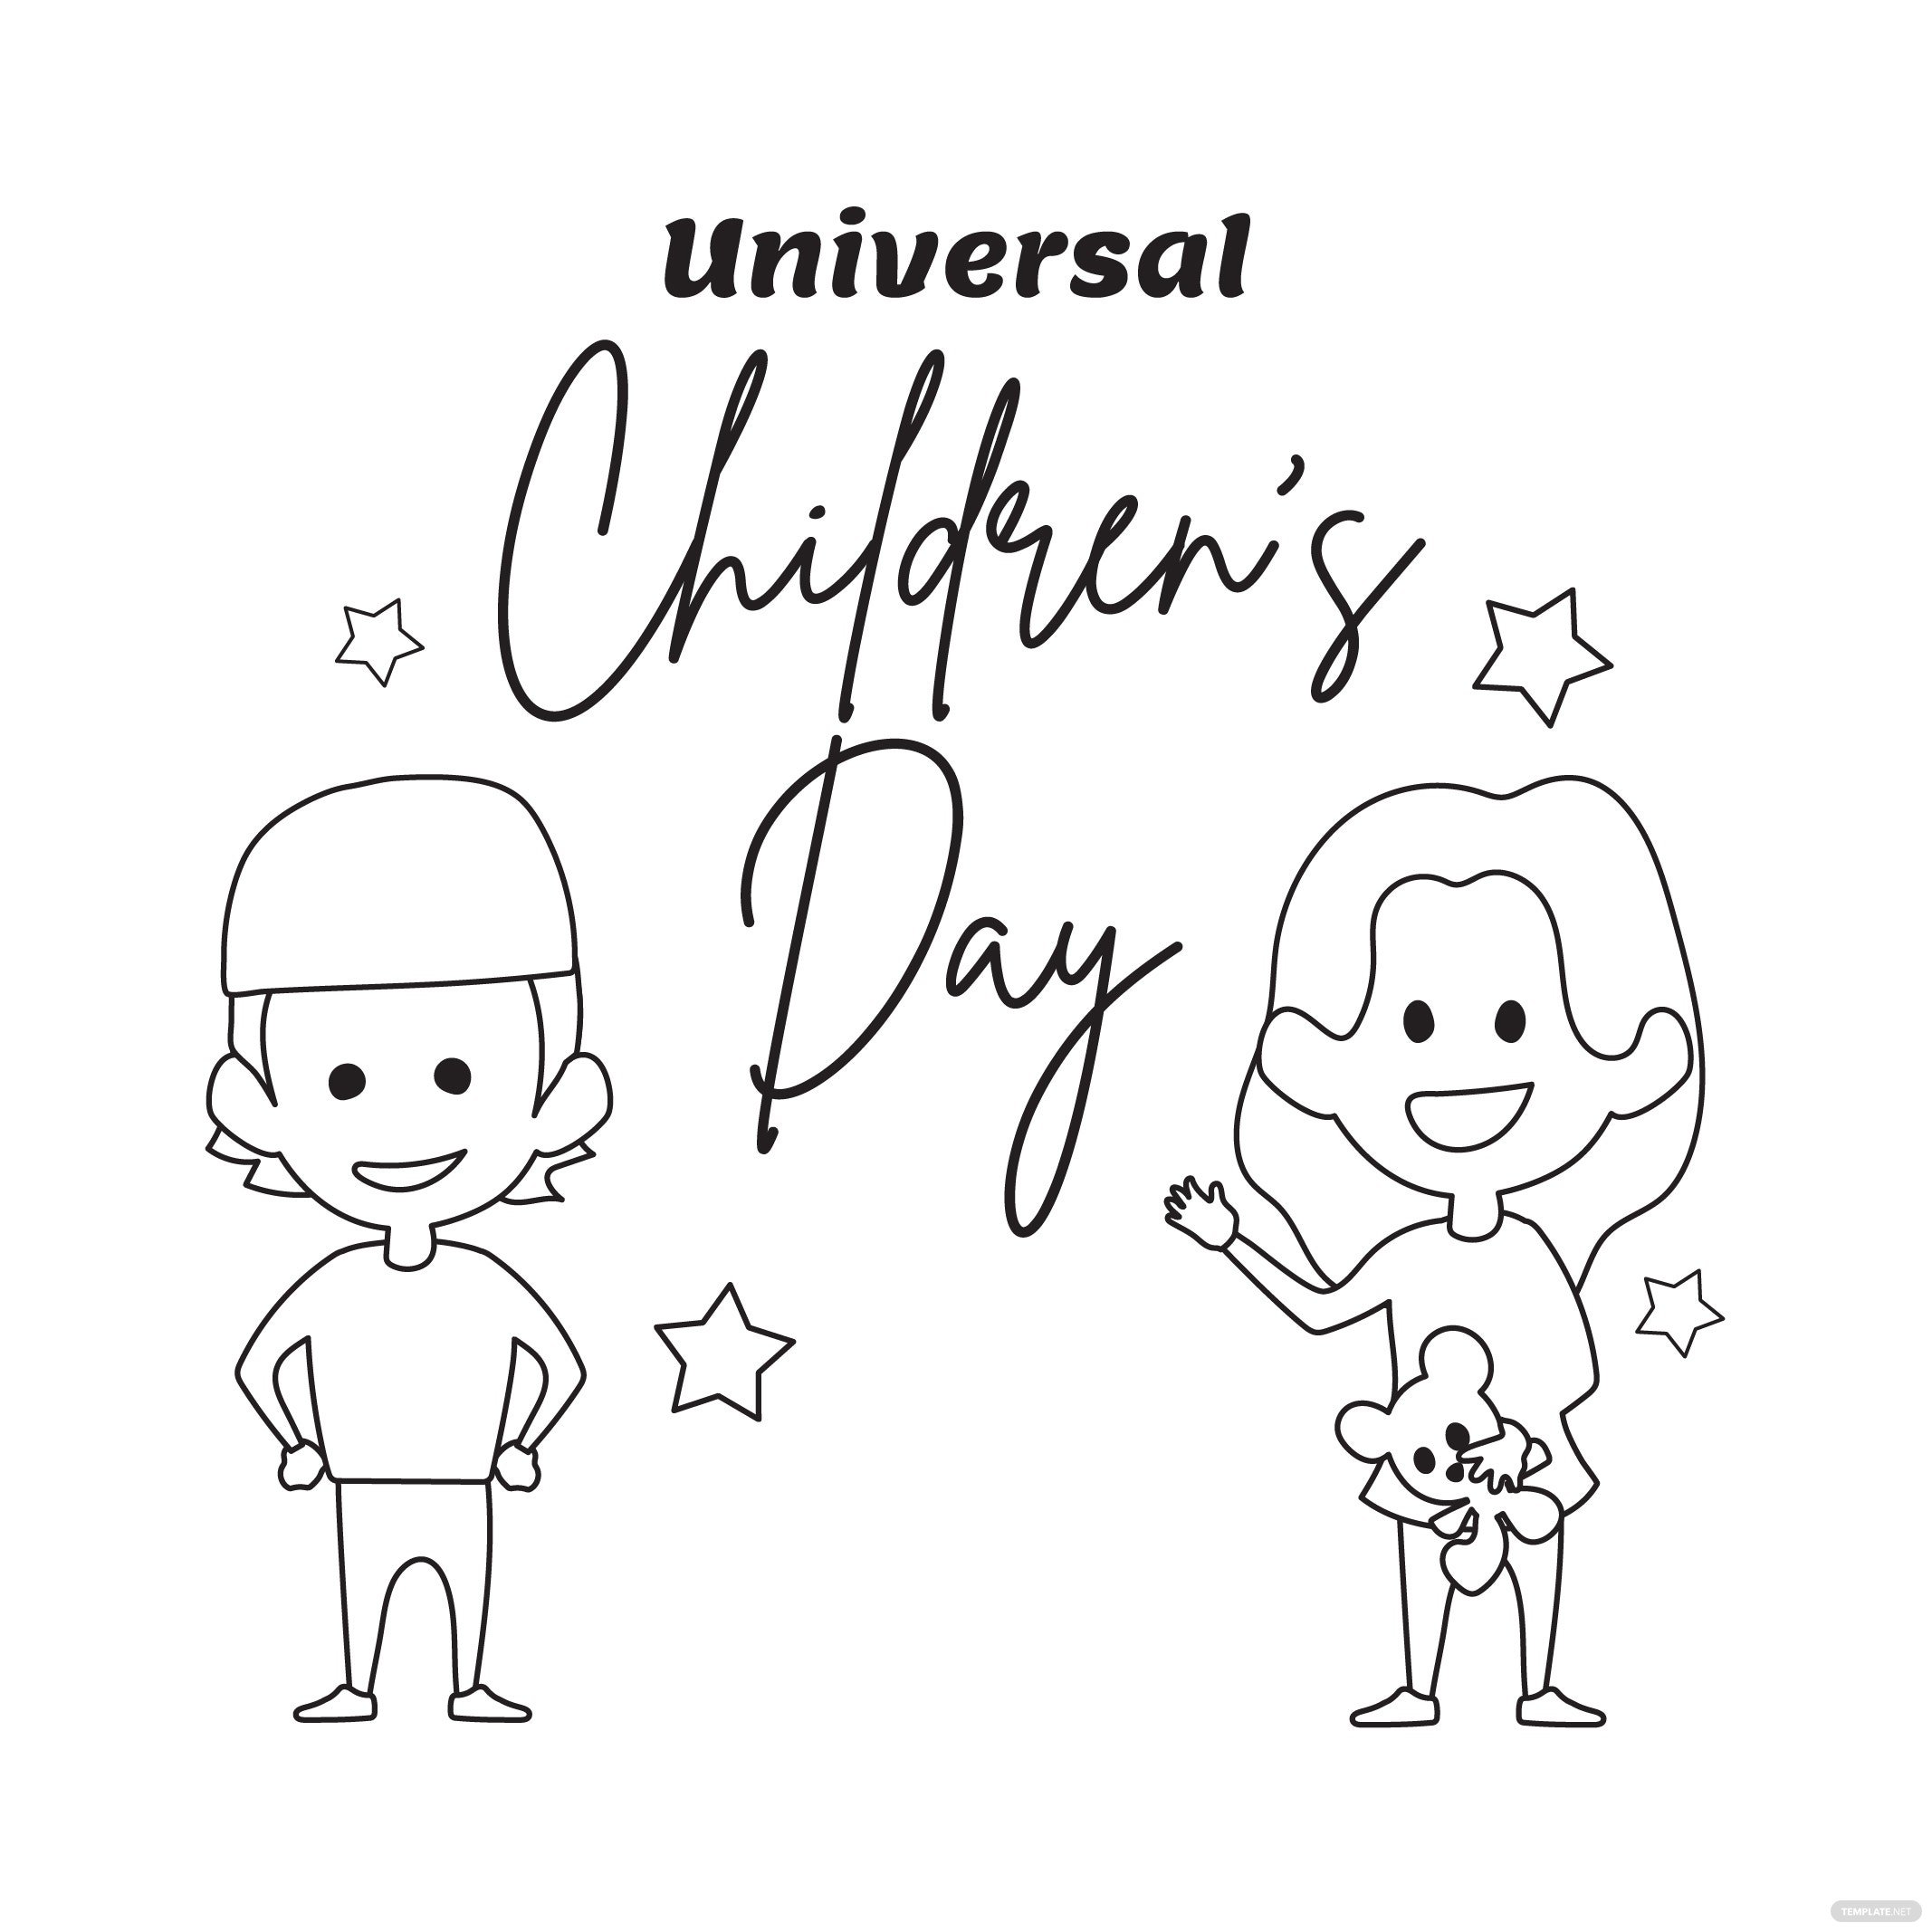 universal children’s day drawing vector ideas and examples